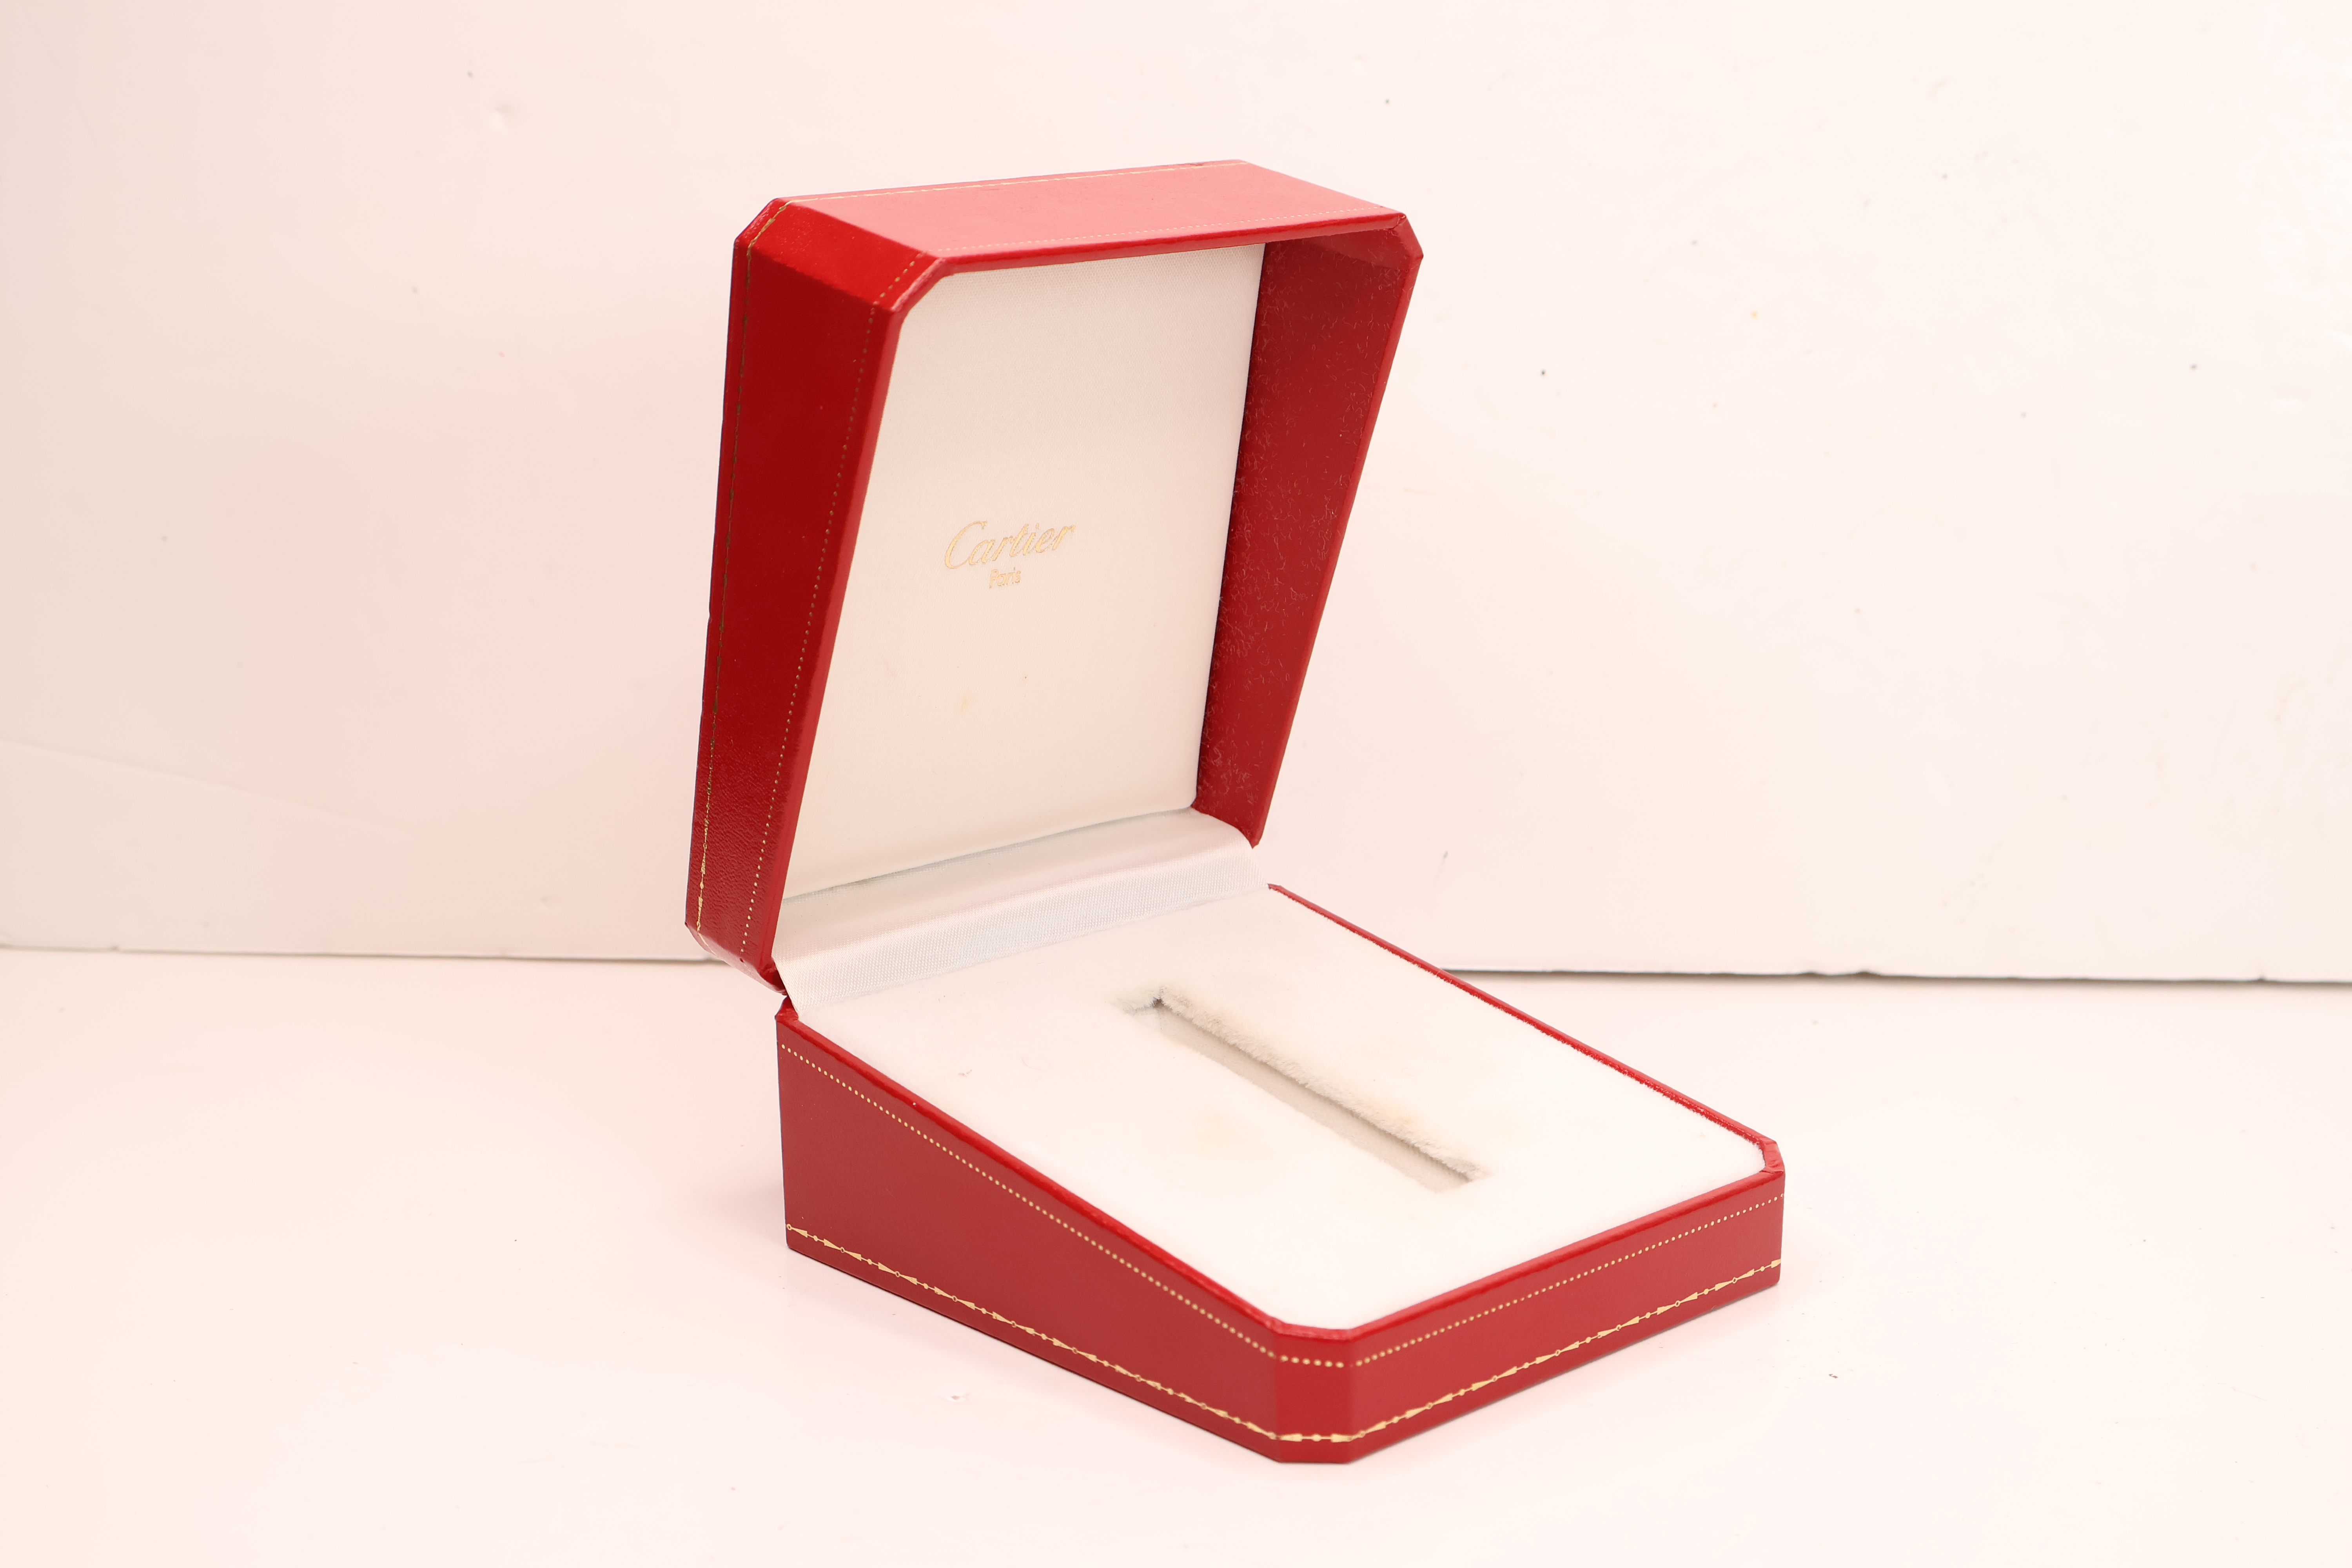 *To Be Sold Without Reserve* Cartier watch box missing c-clip